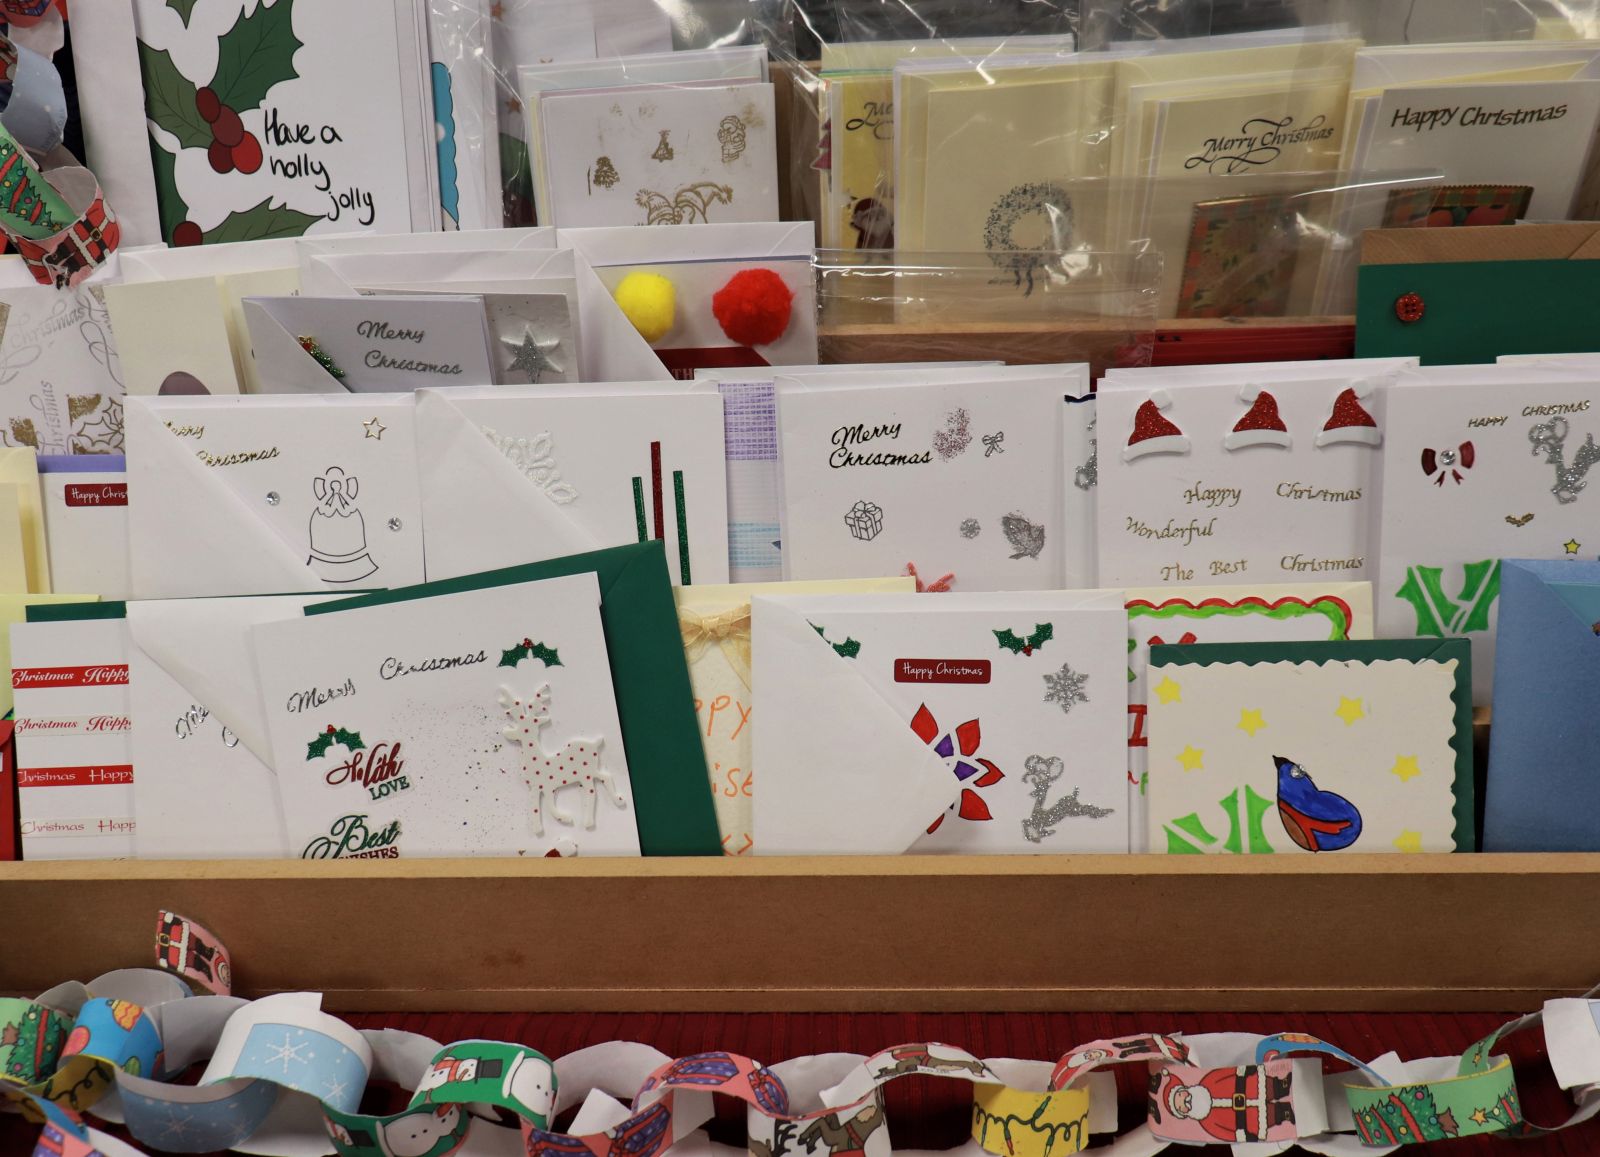 A display of Christmas cards